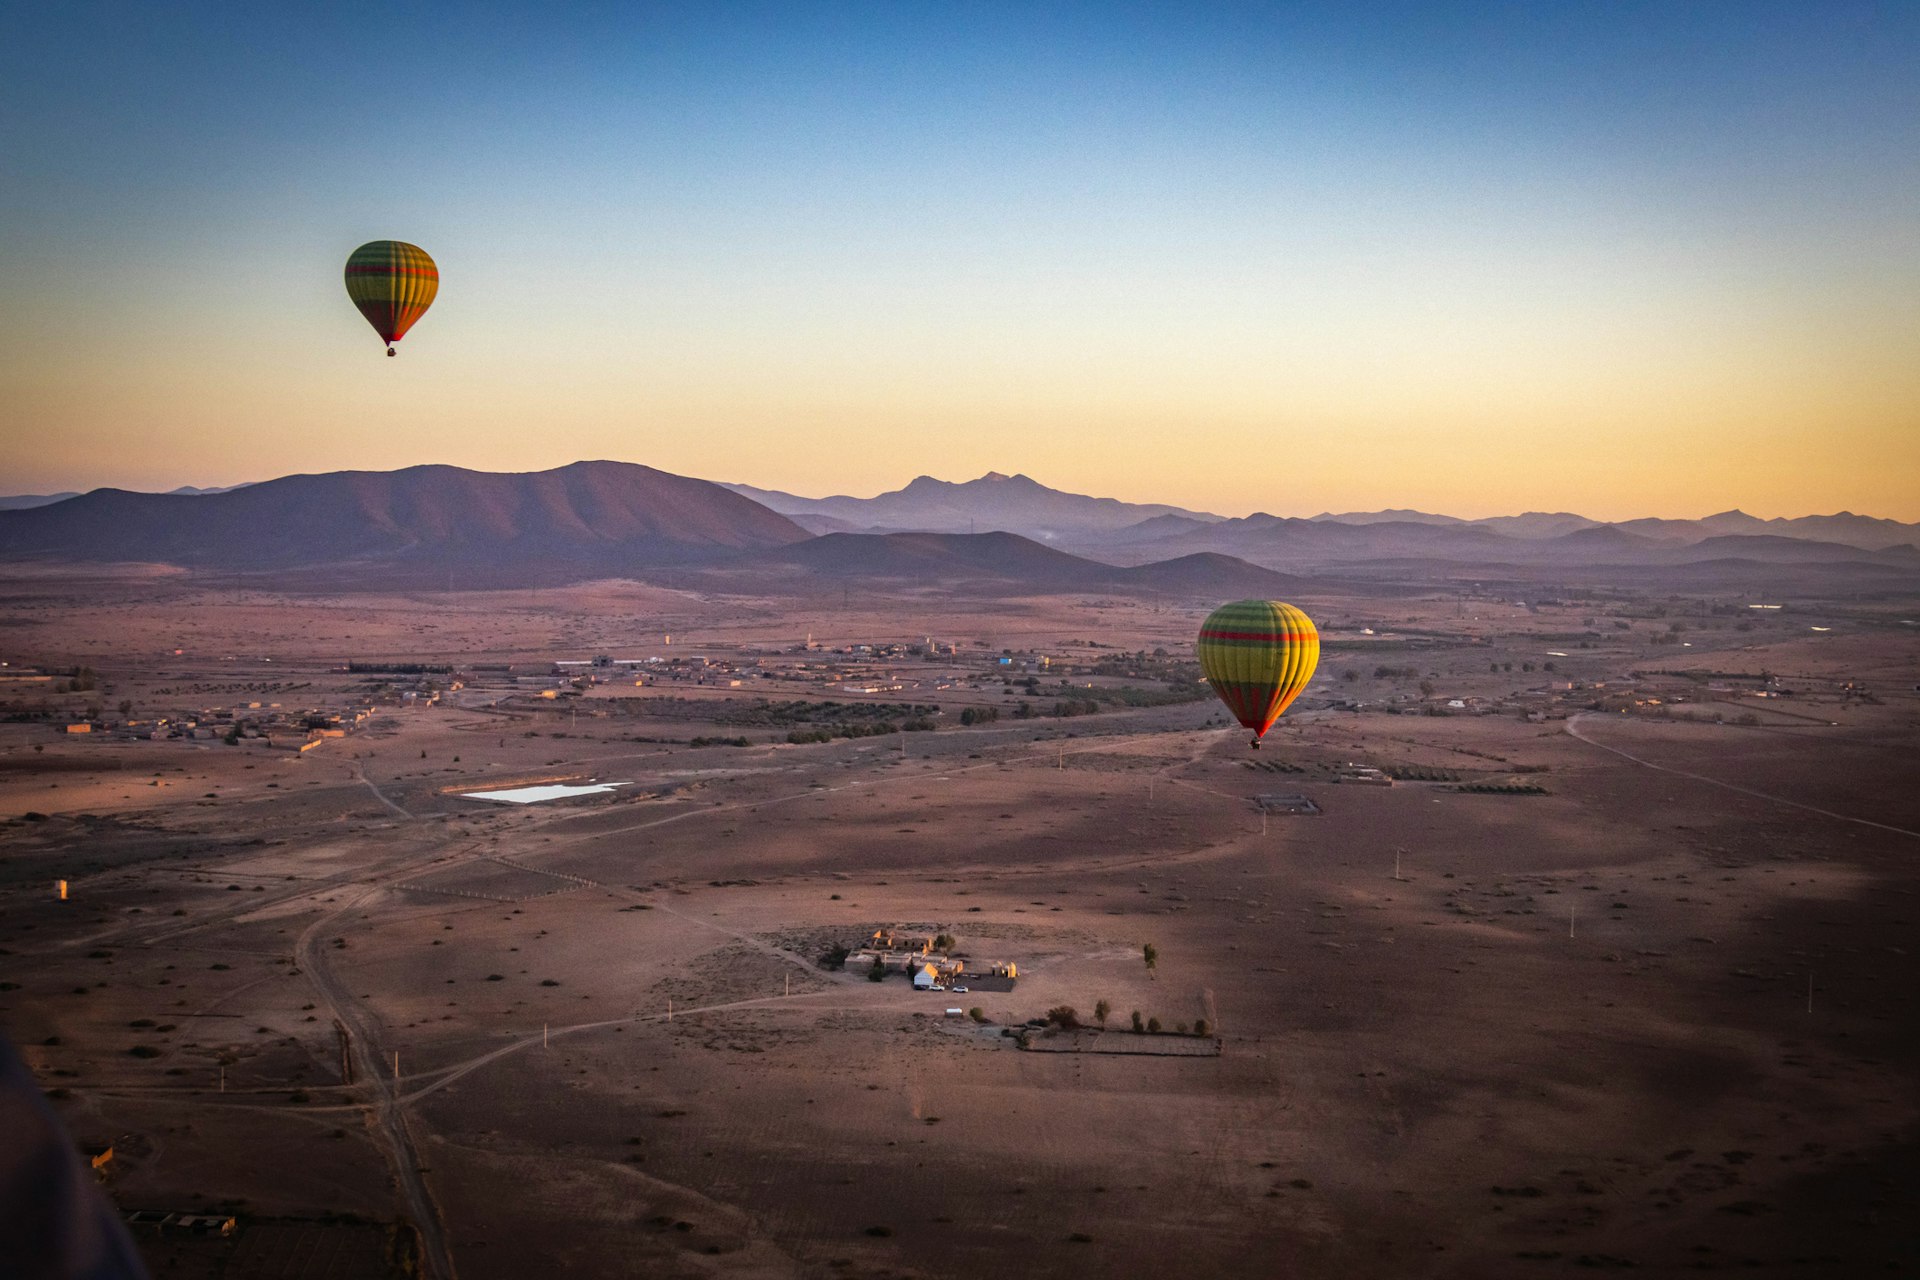 Hot-air ballons take off over a red-hued landscape as the sun rises